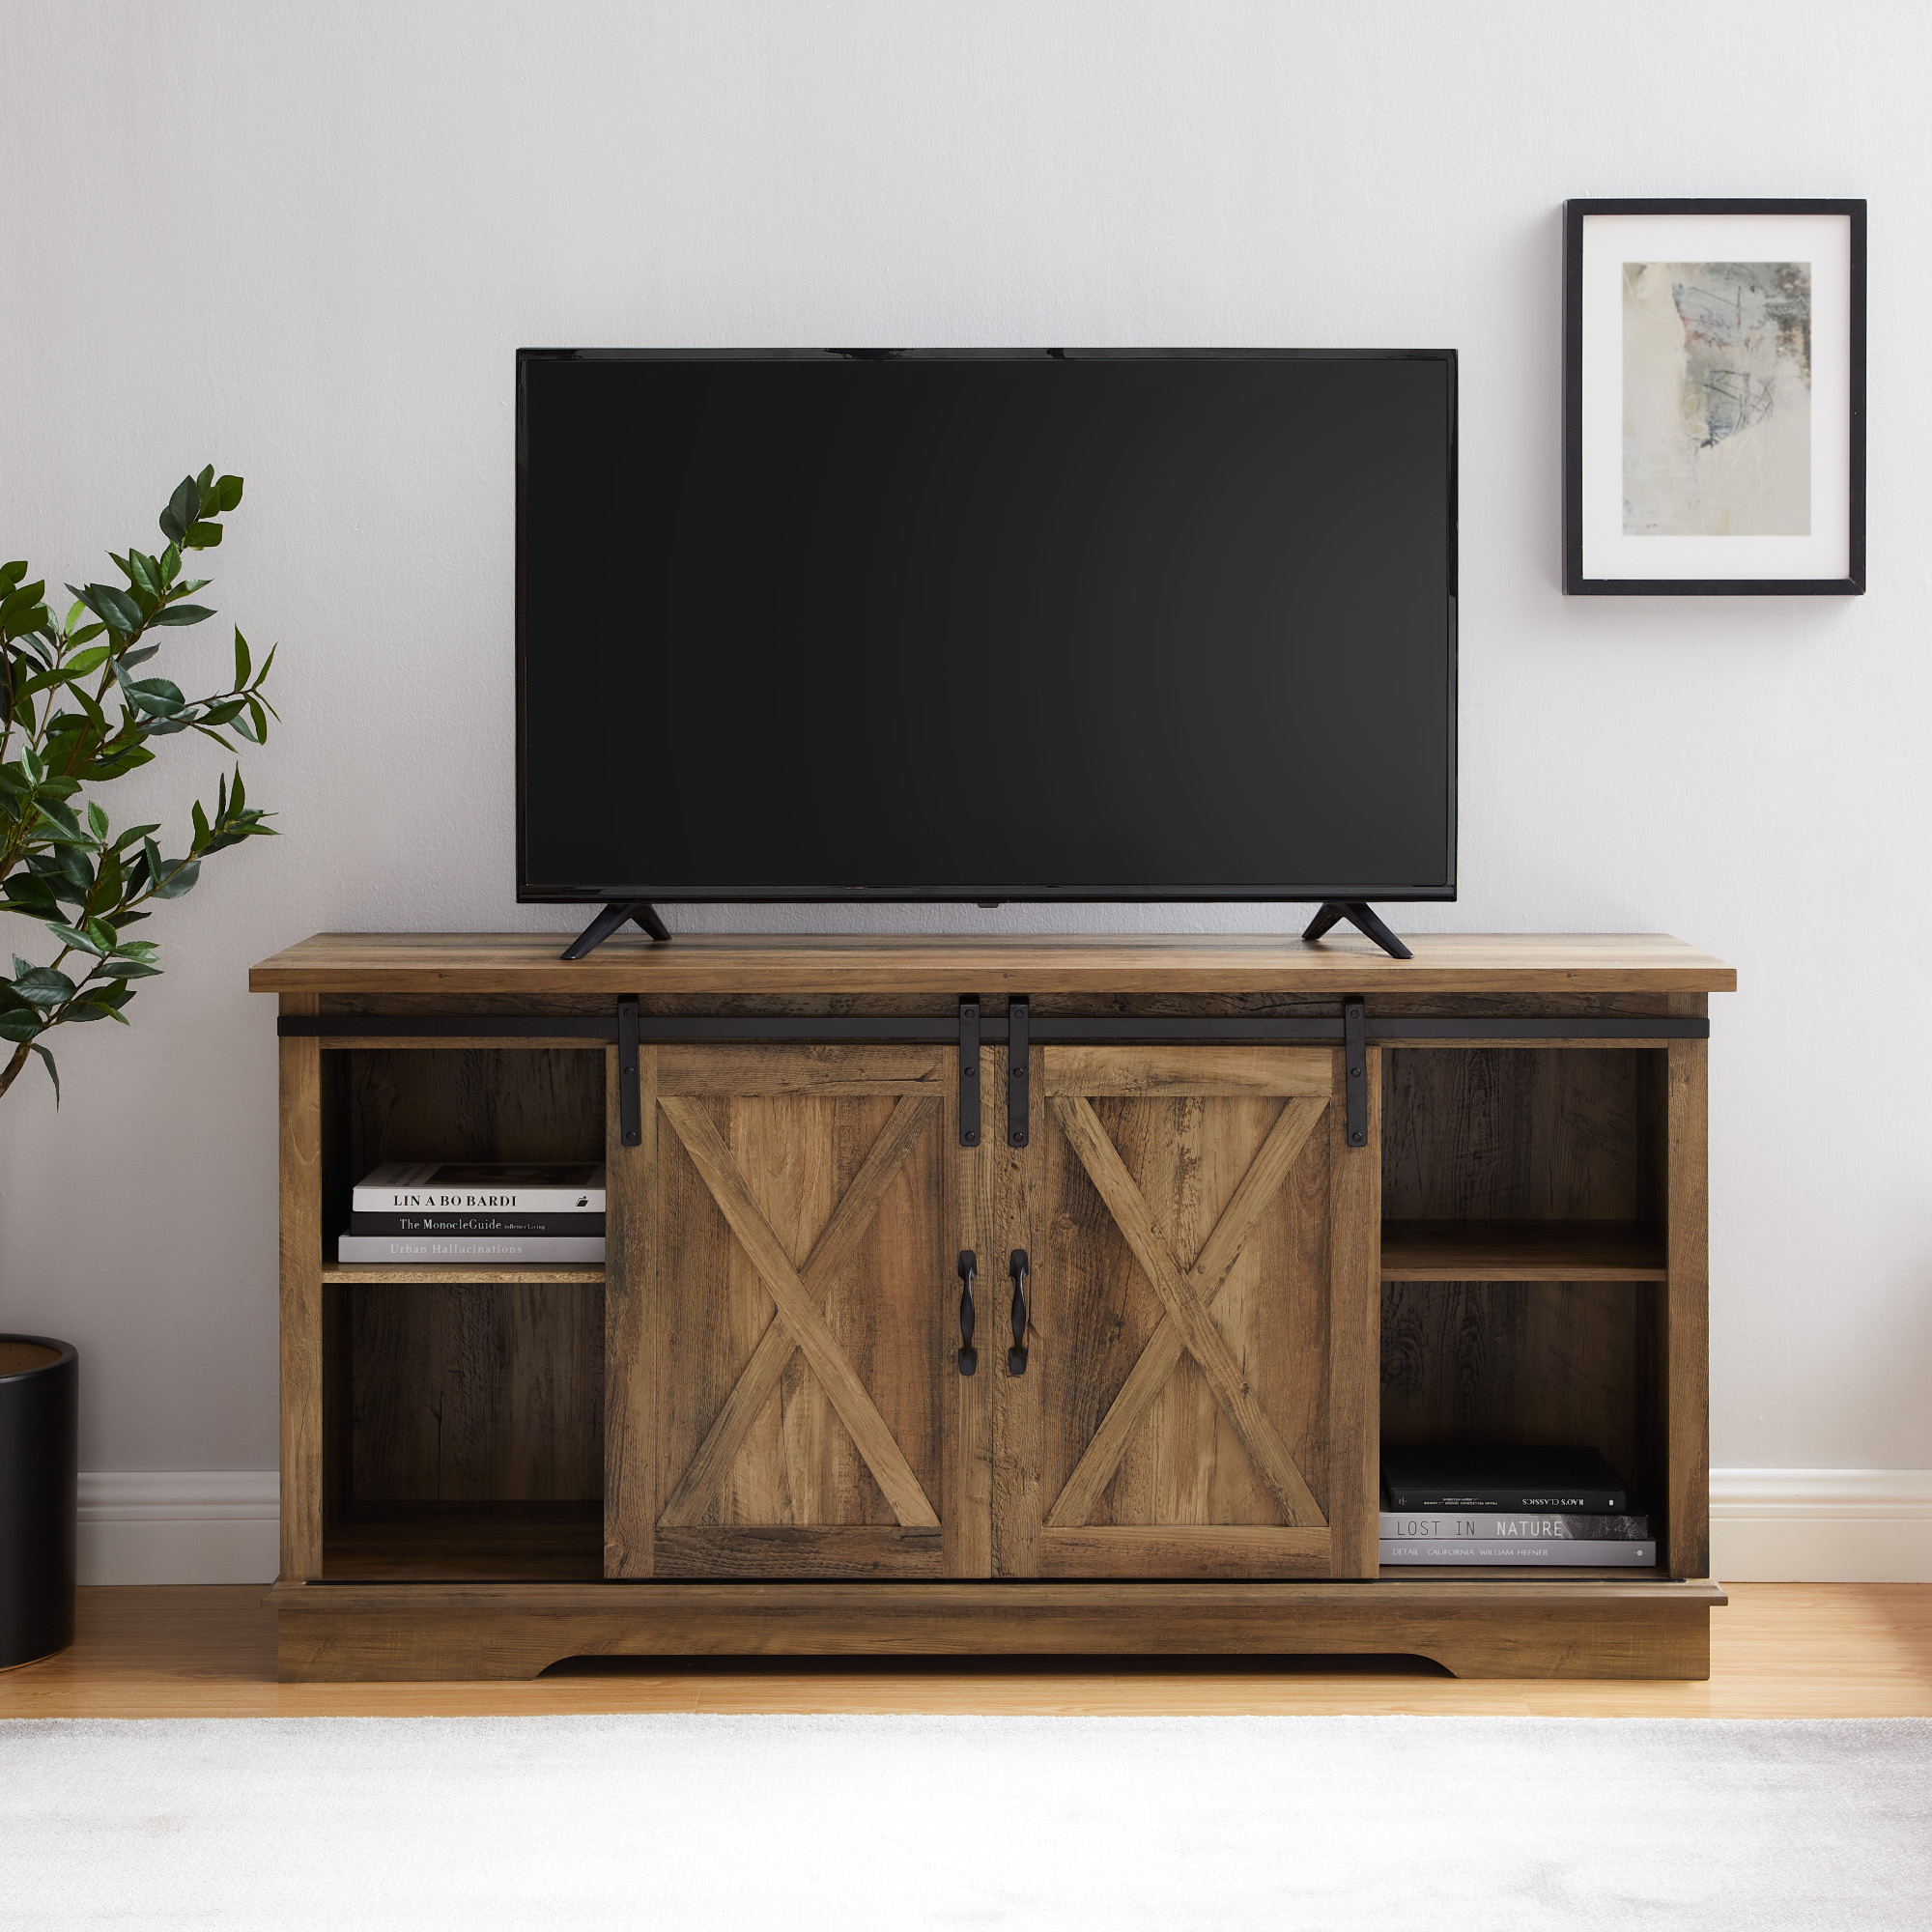 Woven Paths Sliding Farmhouse Barn Door TV Stand for TVs up to 65", Reclaimed Barnwood - image 4 of 11